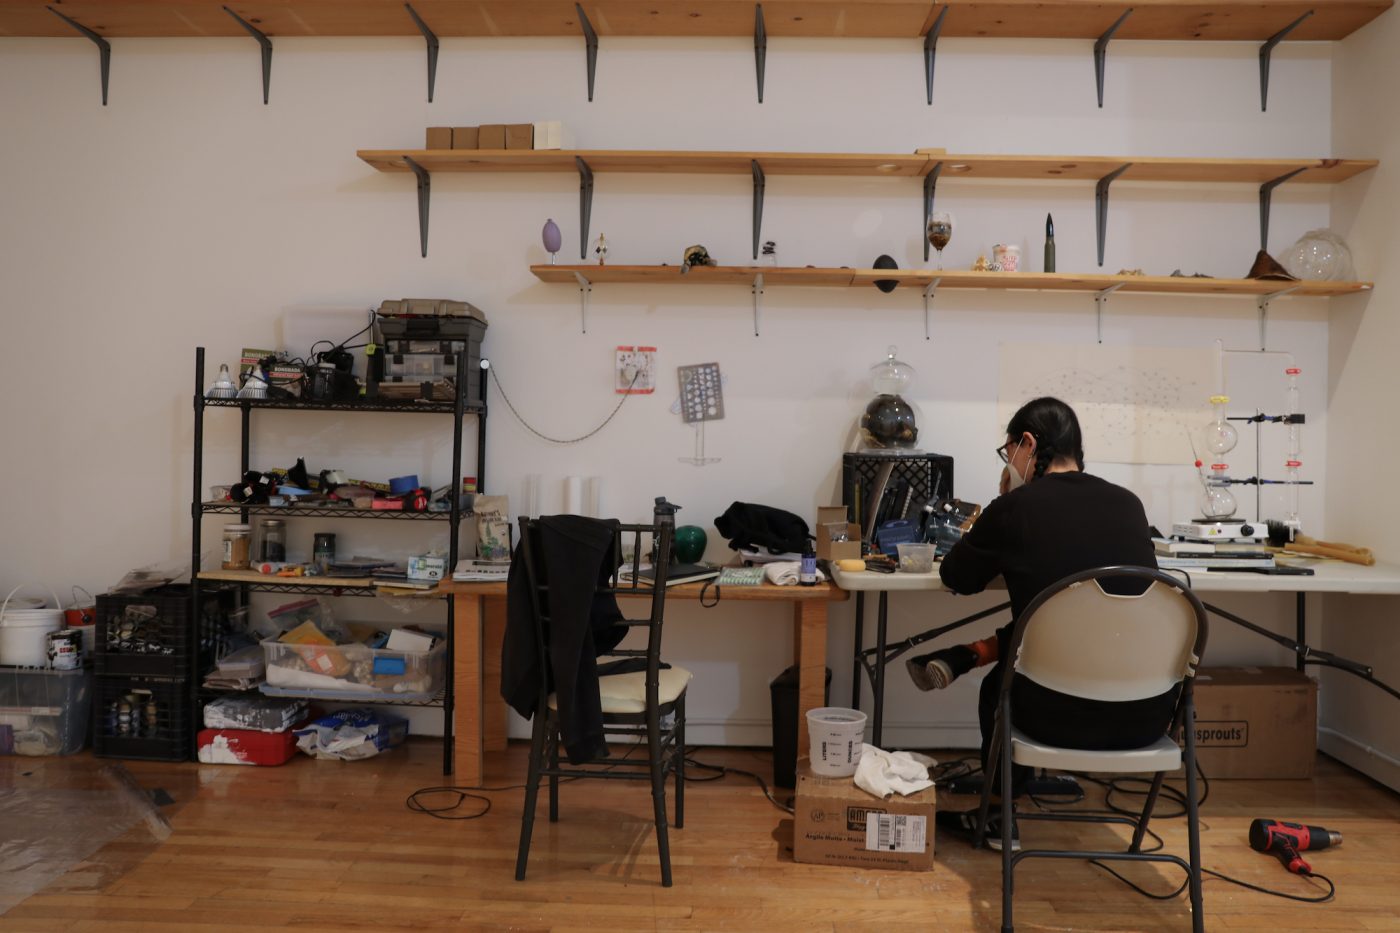 Artist Mo Kong is seated at their studio desk with supplies surrounding them and on shelves, including vessels resembling laboratory equipment.